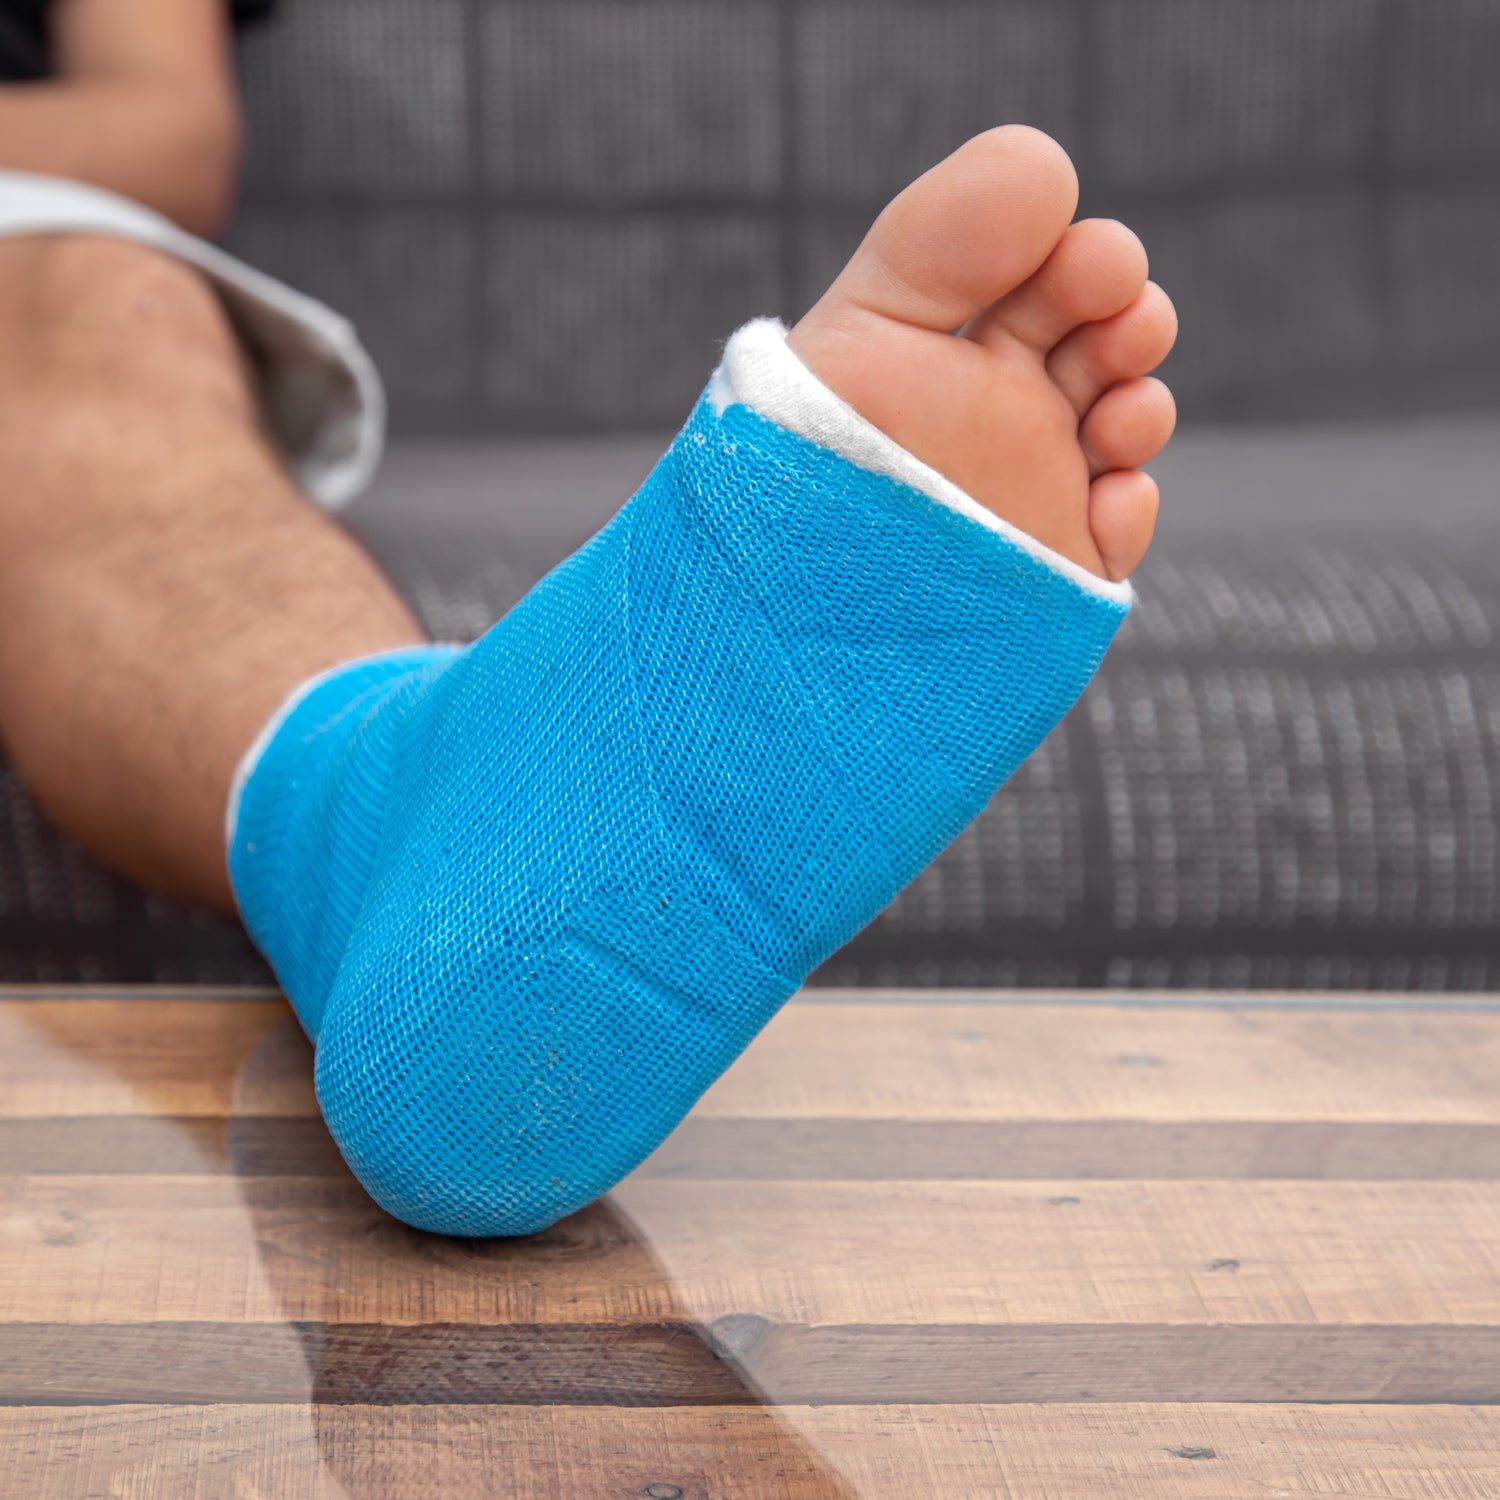 You Hurt Your Foot or Ankle: Tips for a Better Recovery